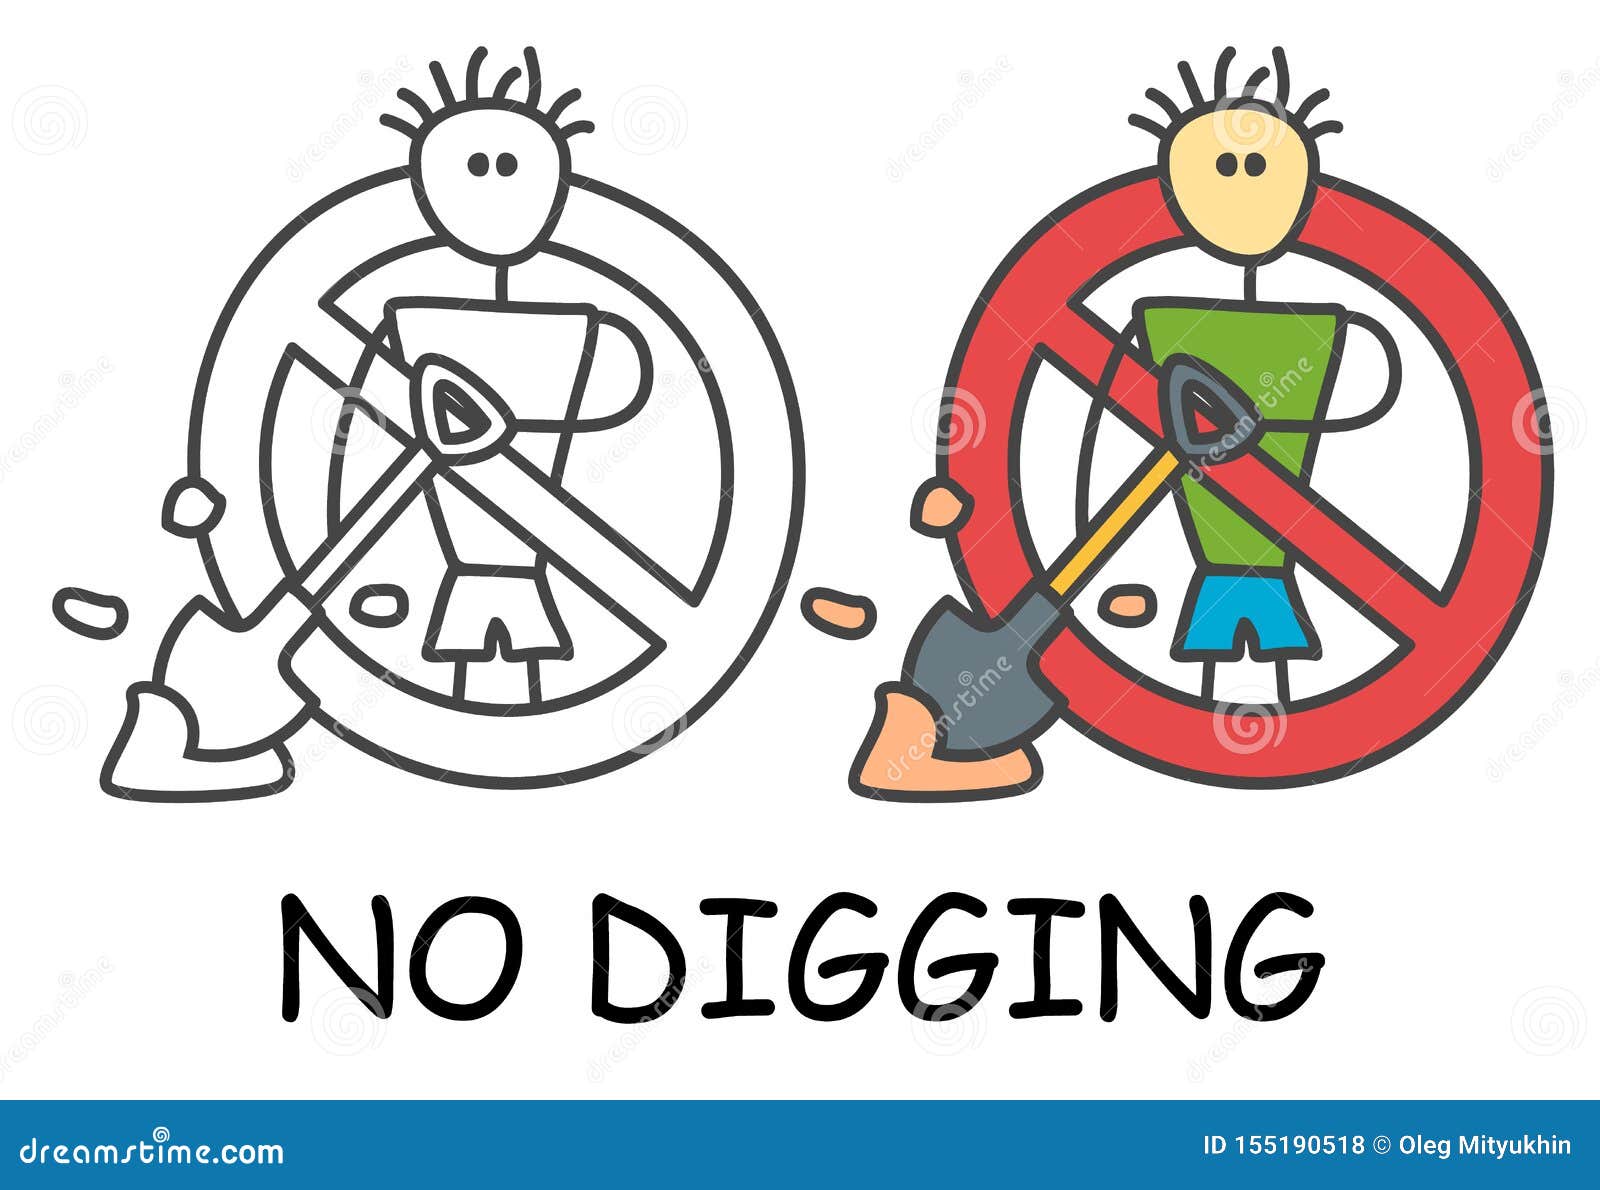 funny  stick man with a shovel in children`s style. no digging no excavate sign red prohibition. stop .